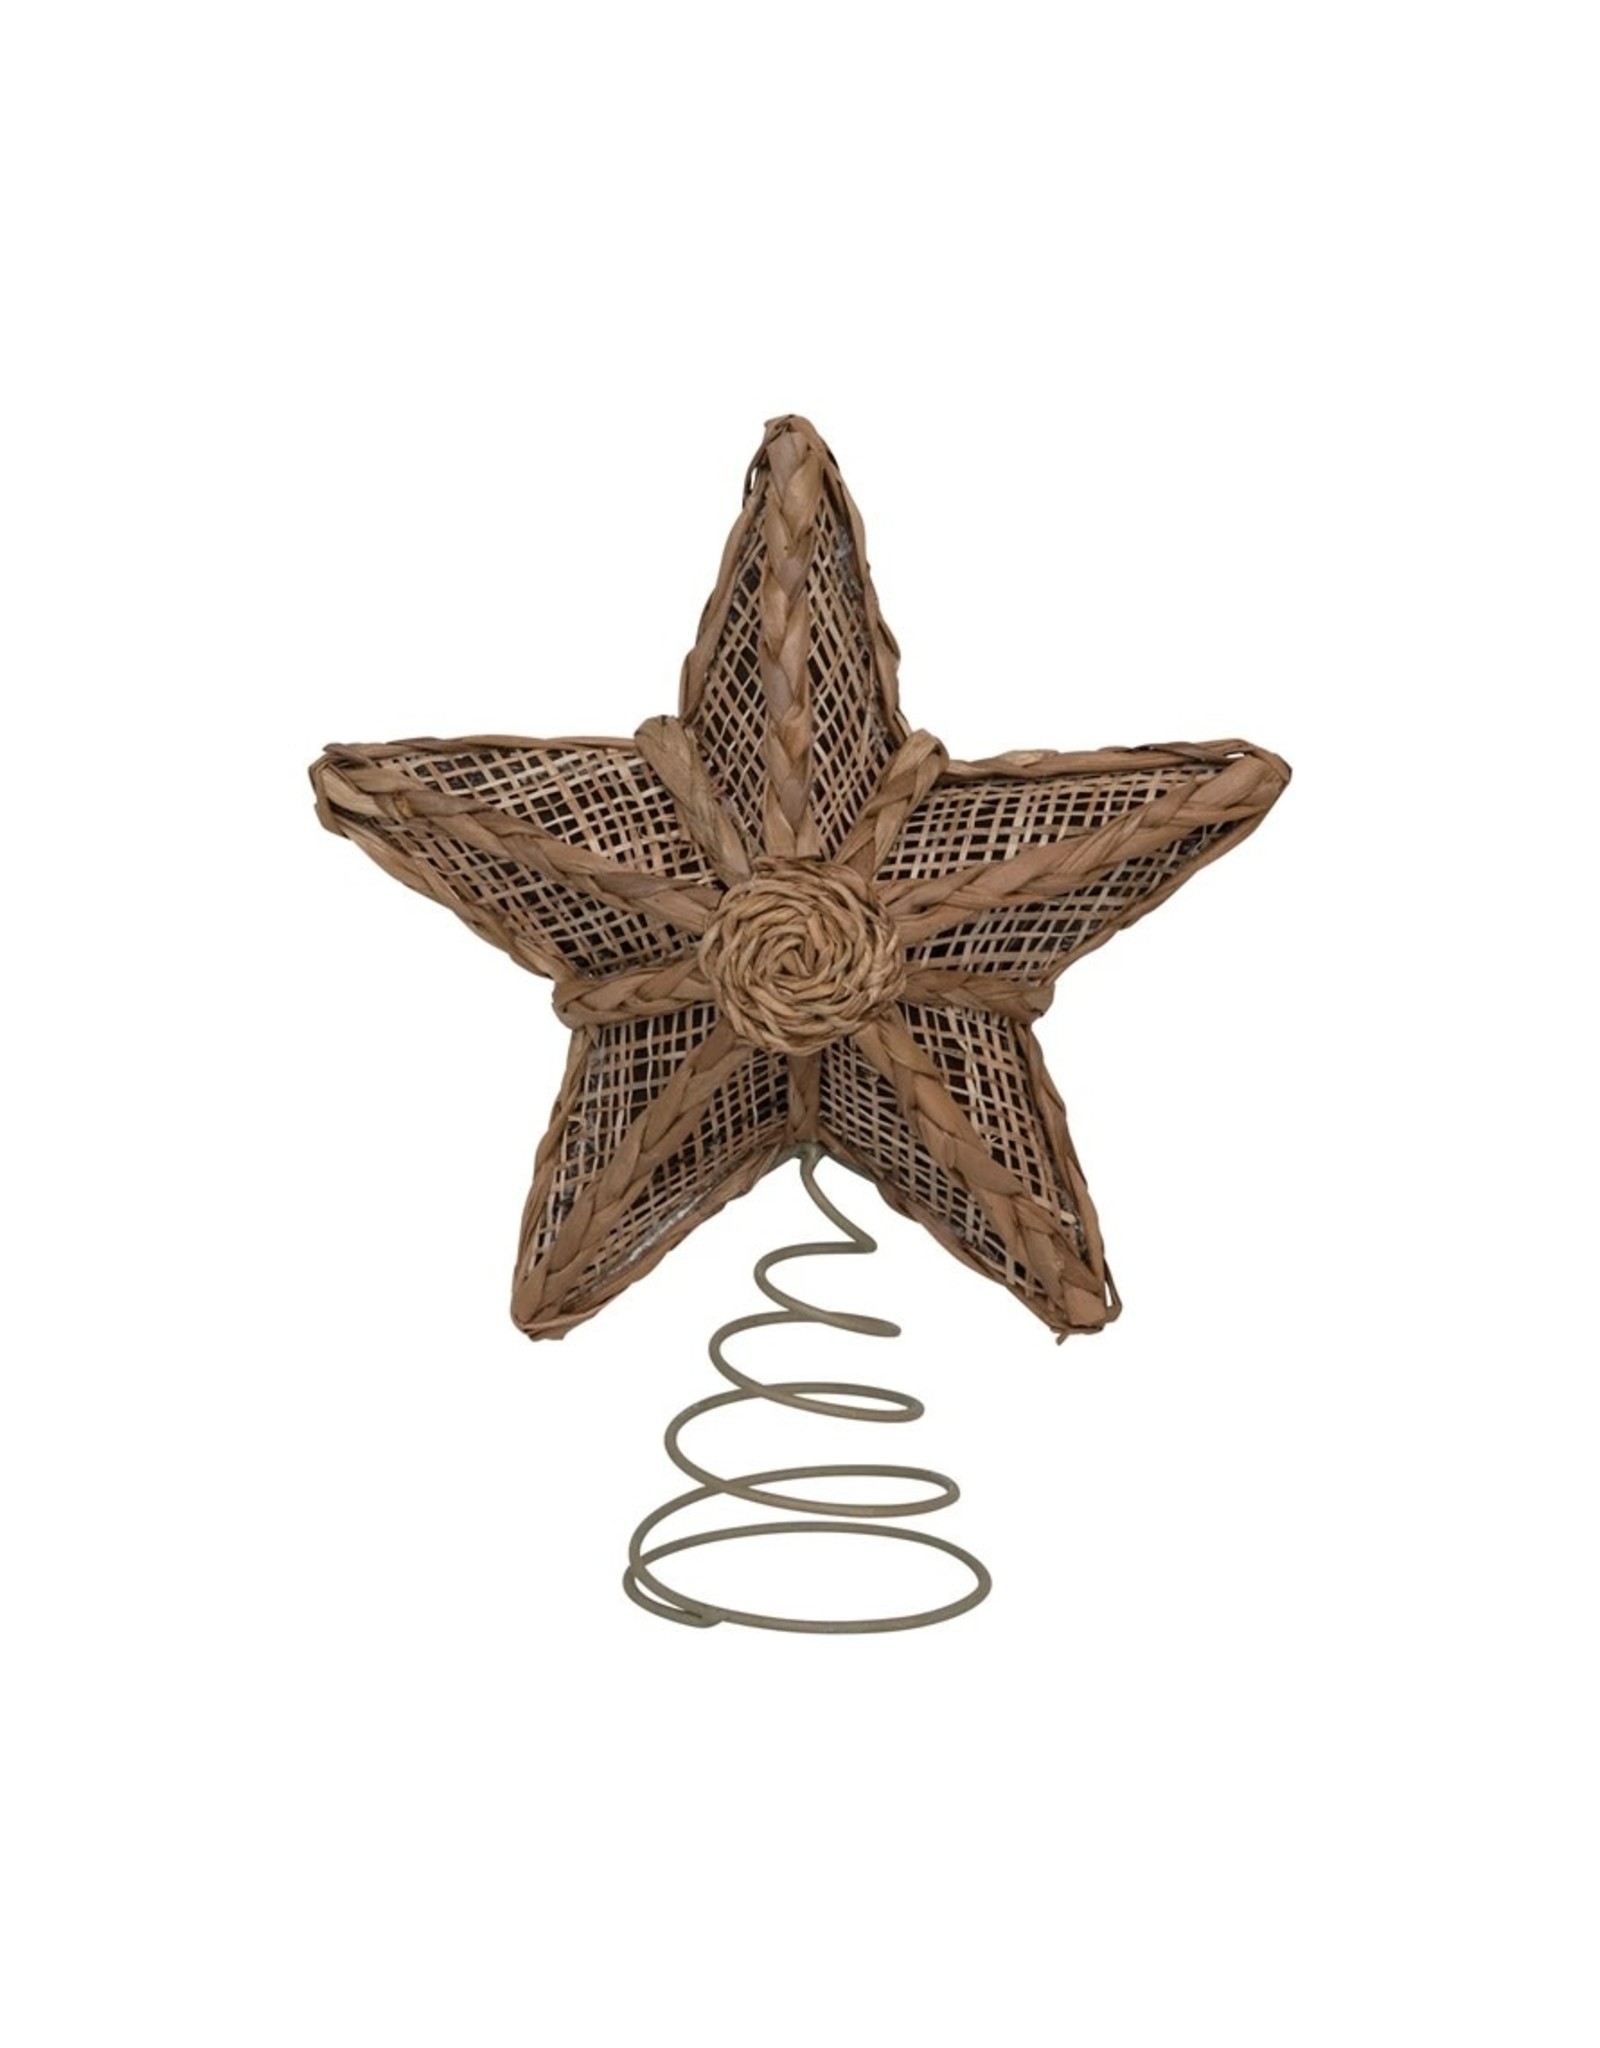 XS0384  NEW 7"L x 7"W x 9-1/2"H Hand-Woven Burlap, Bankuan and Metal Star Tree Topper, Natural